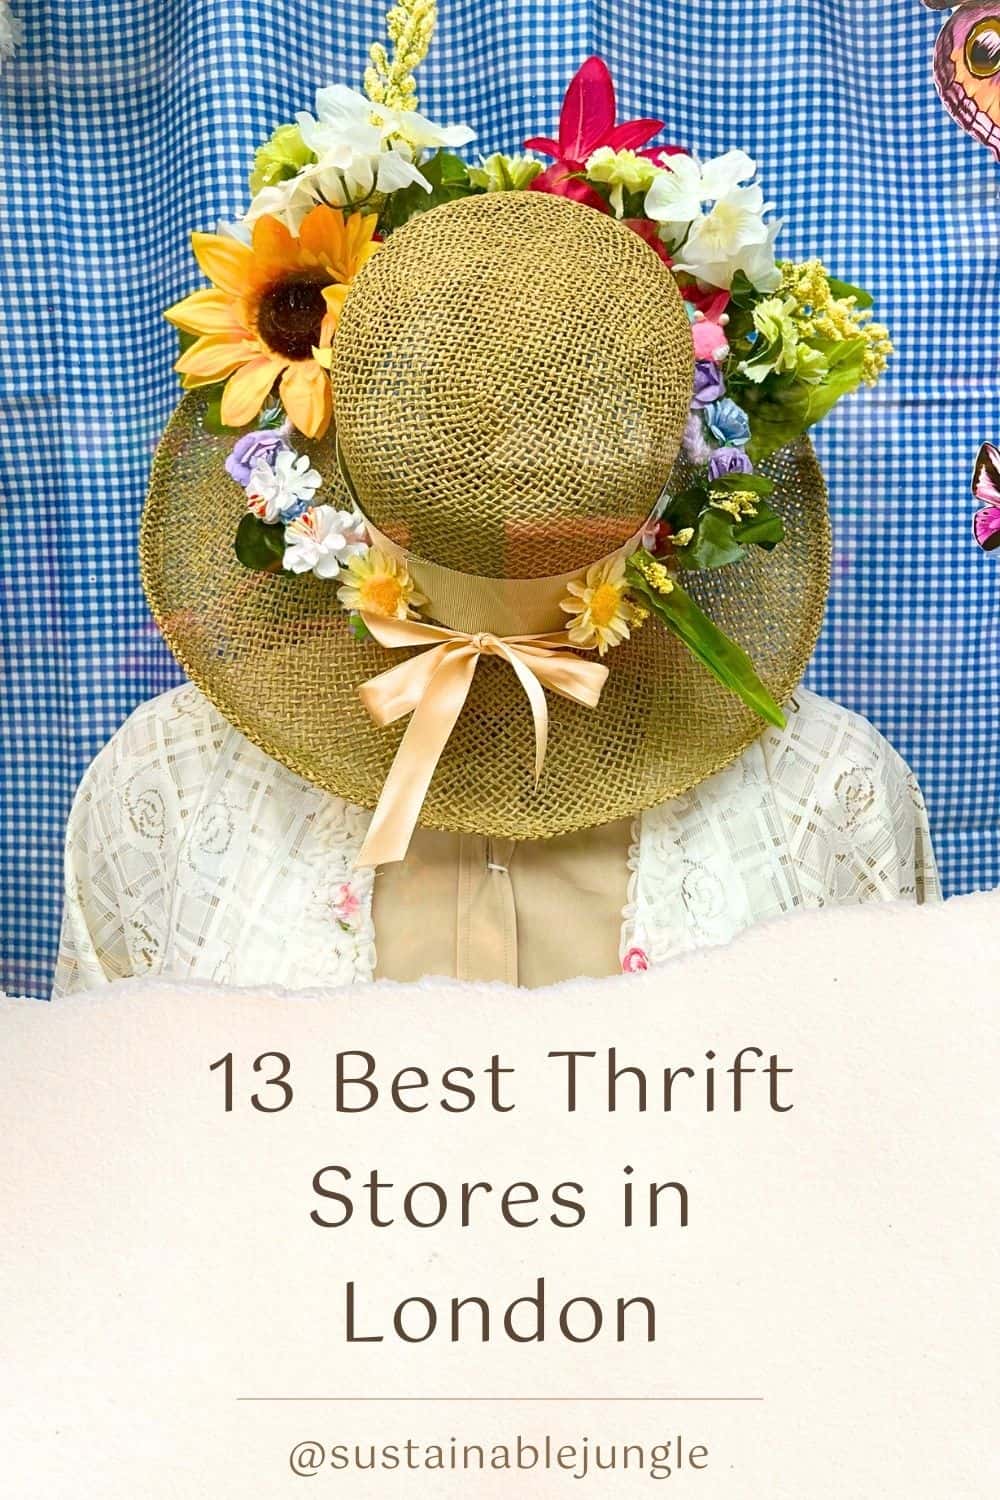 13 Best London Thrift Stores For Some Sustainably Posh & Preloved Purchases Image by Oxfam Boutique #londonthriftstores #bestthriftstoresinLondon #thriftshopsLondon #bestsecondhandshopslondon #bestlondonthriftstores #sustainablejungle